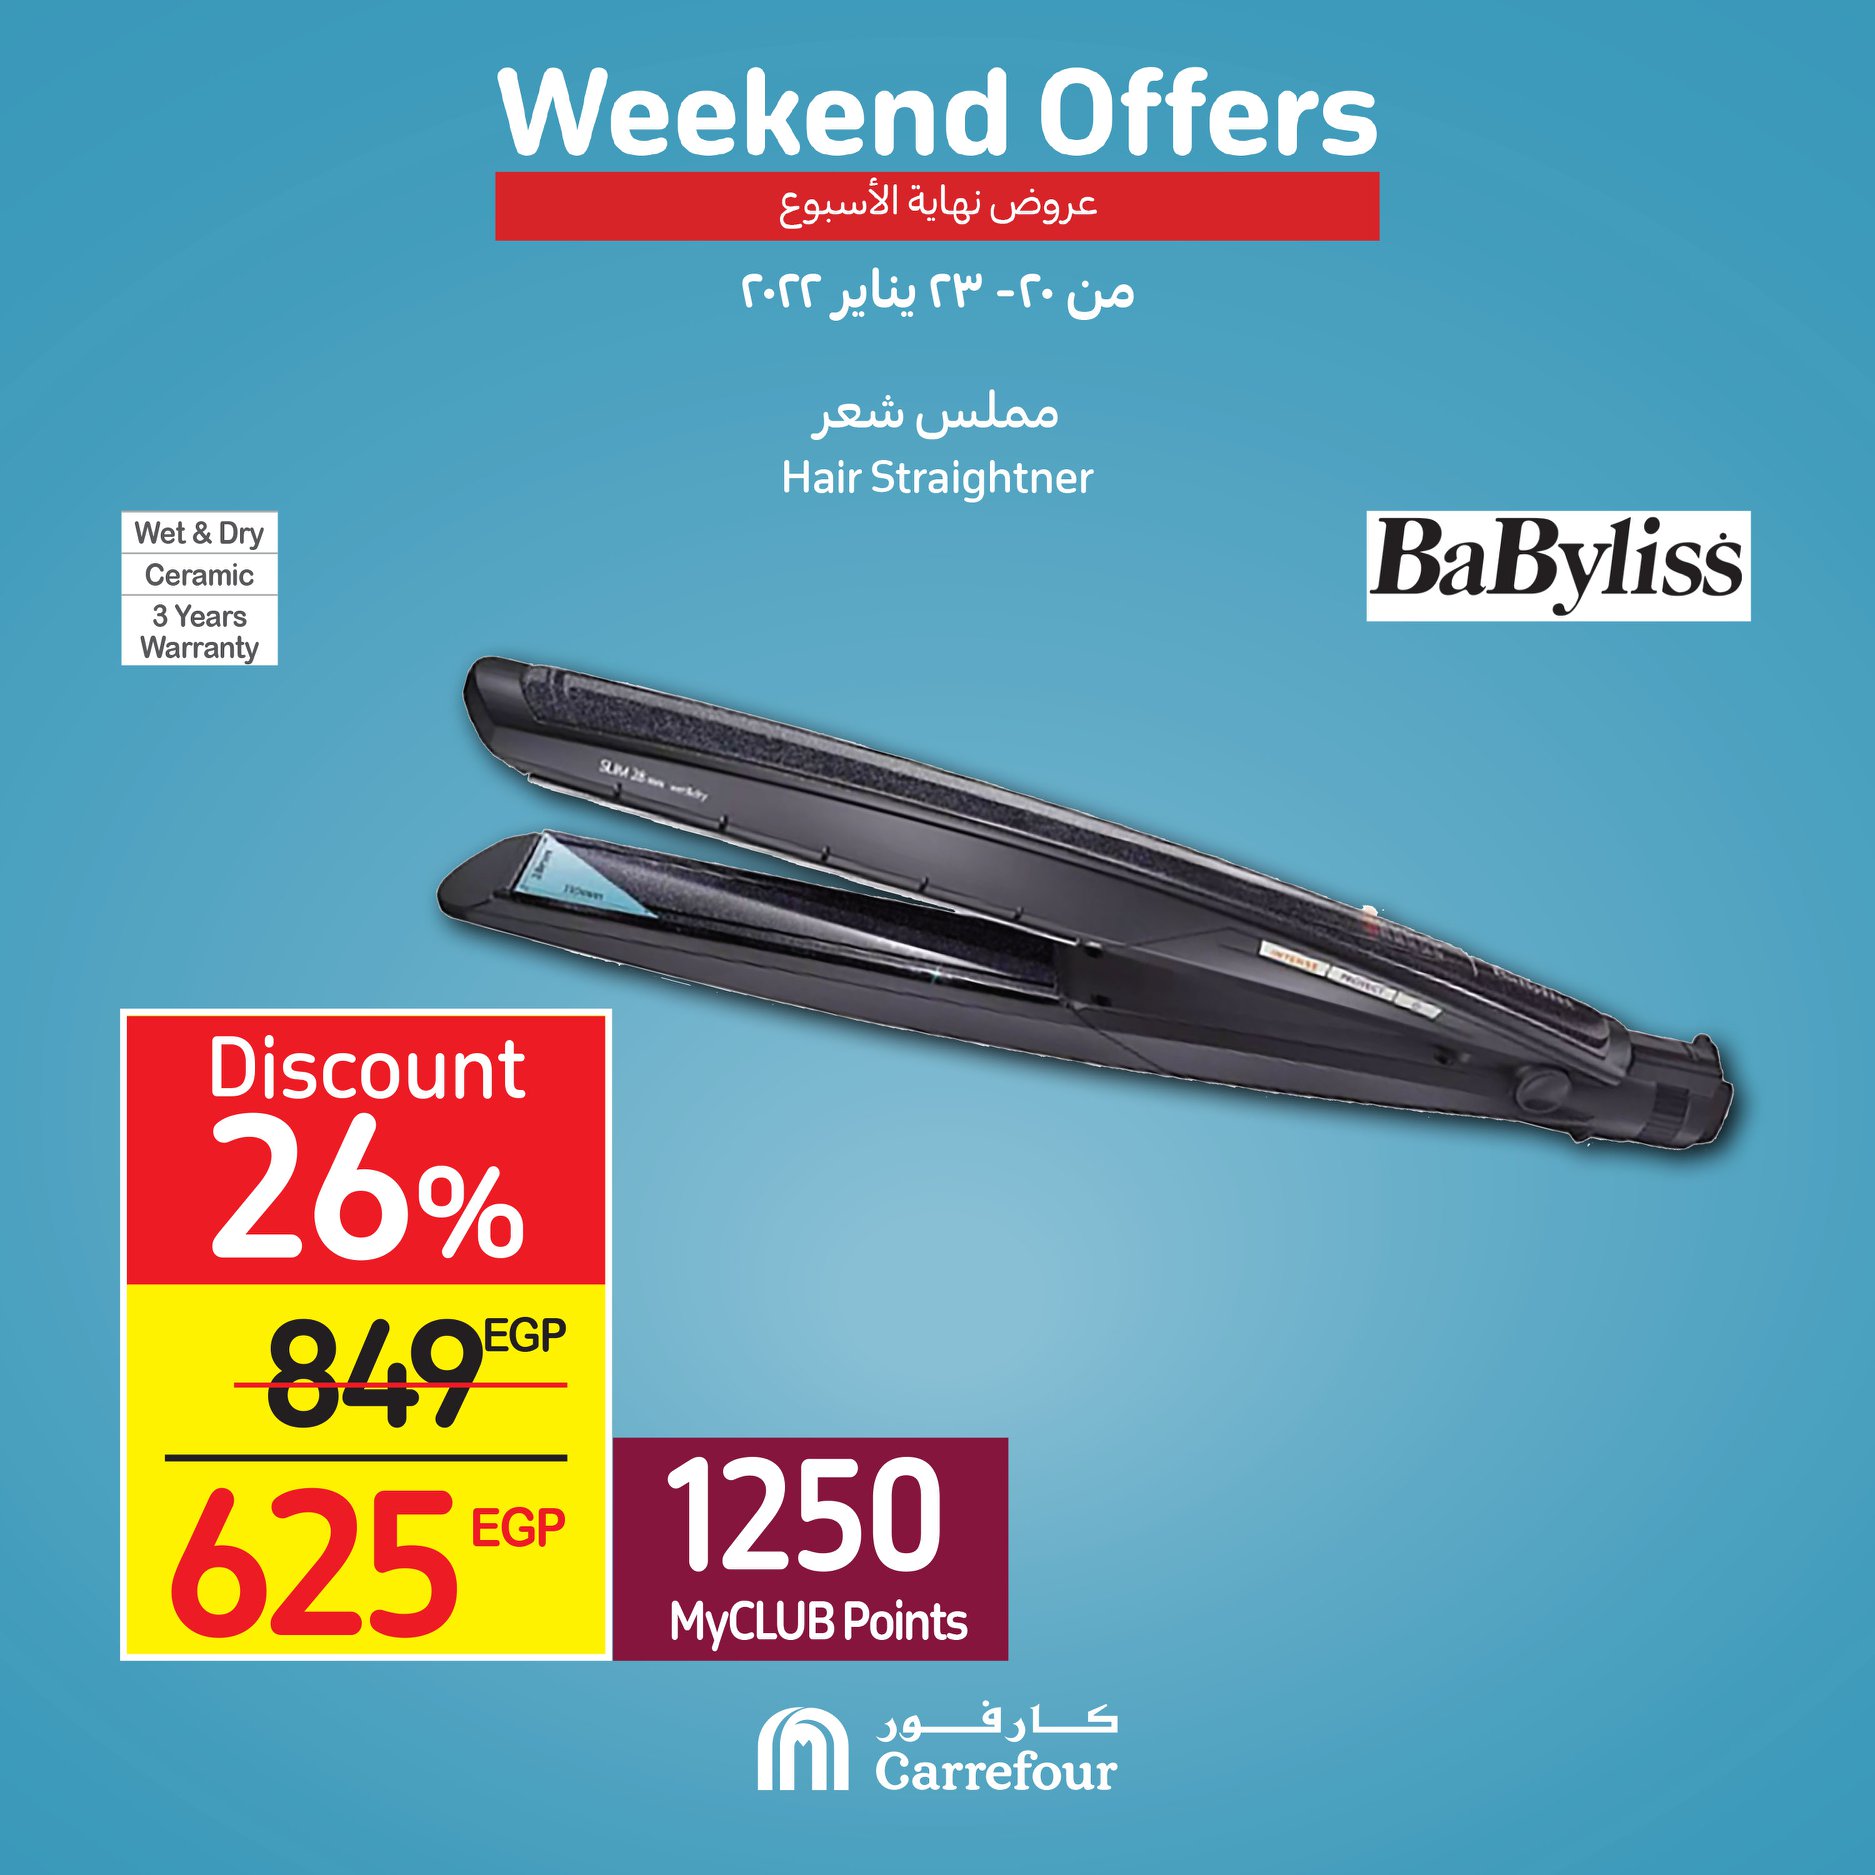 Watch Carrefour's gifts and surprises at Weekend and dirt cheap prices 18